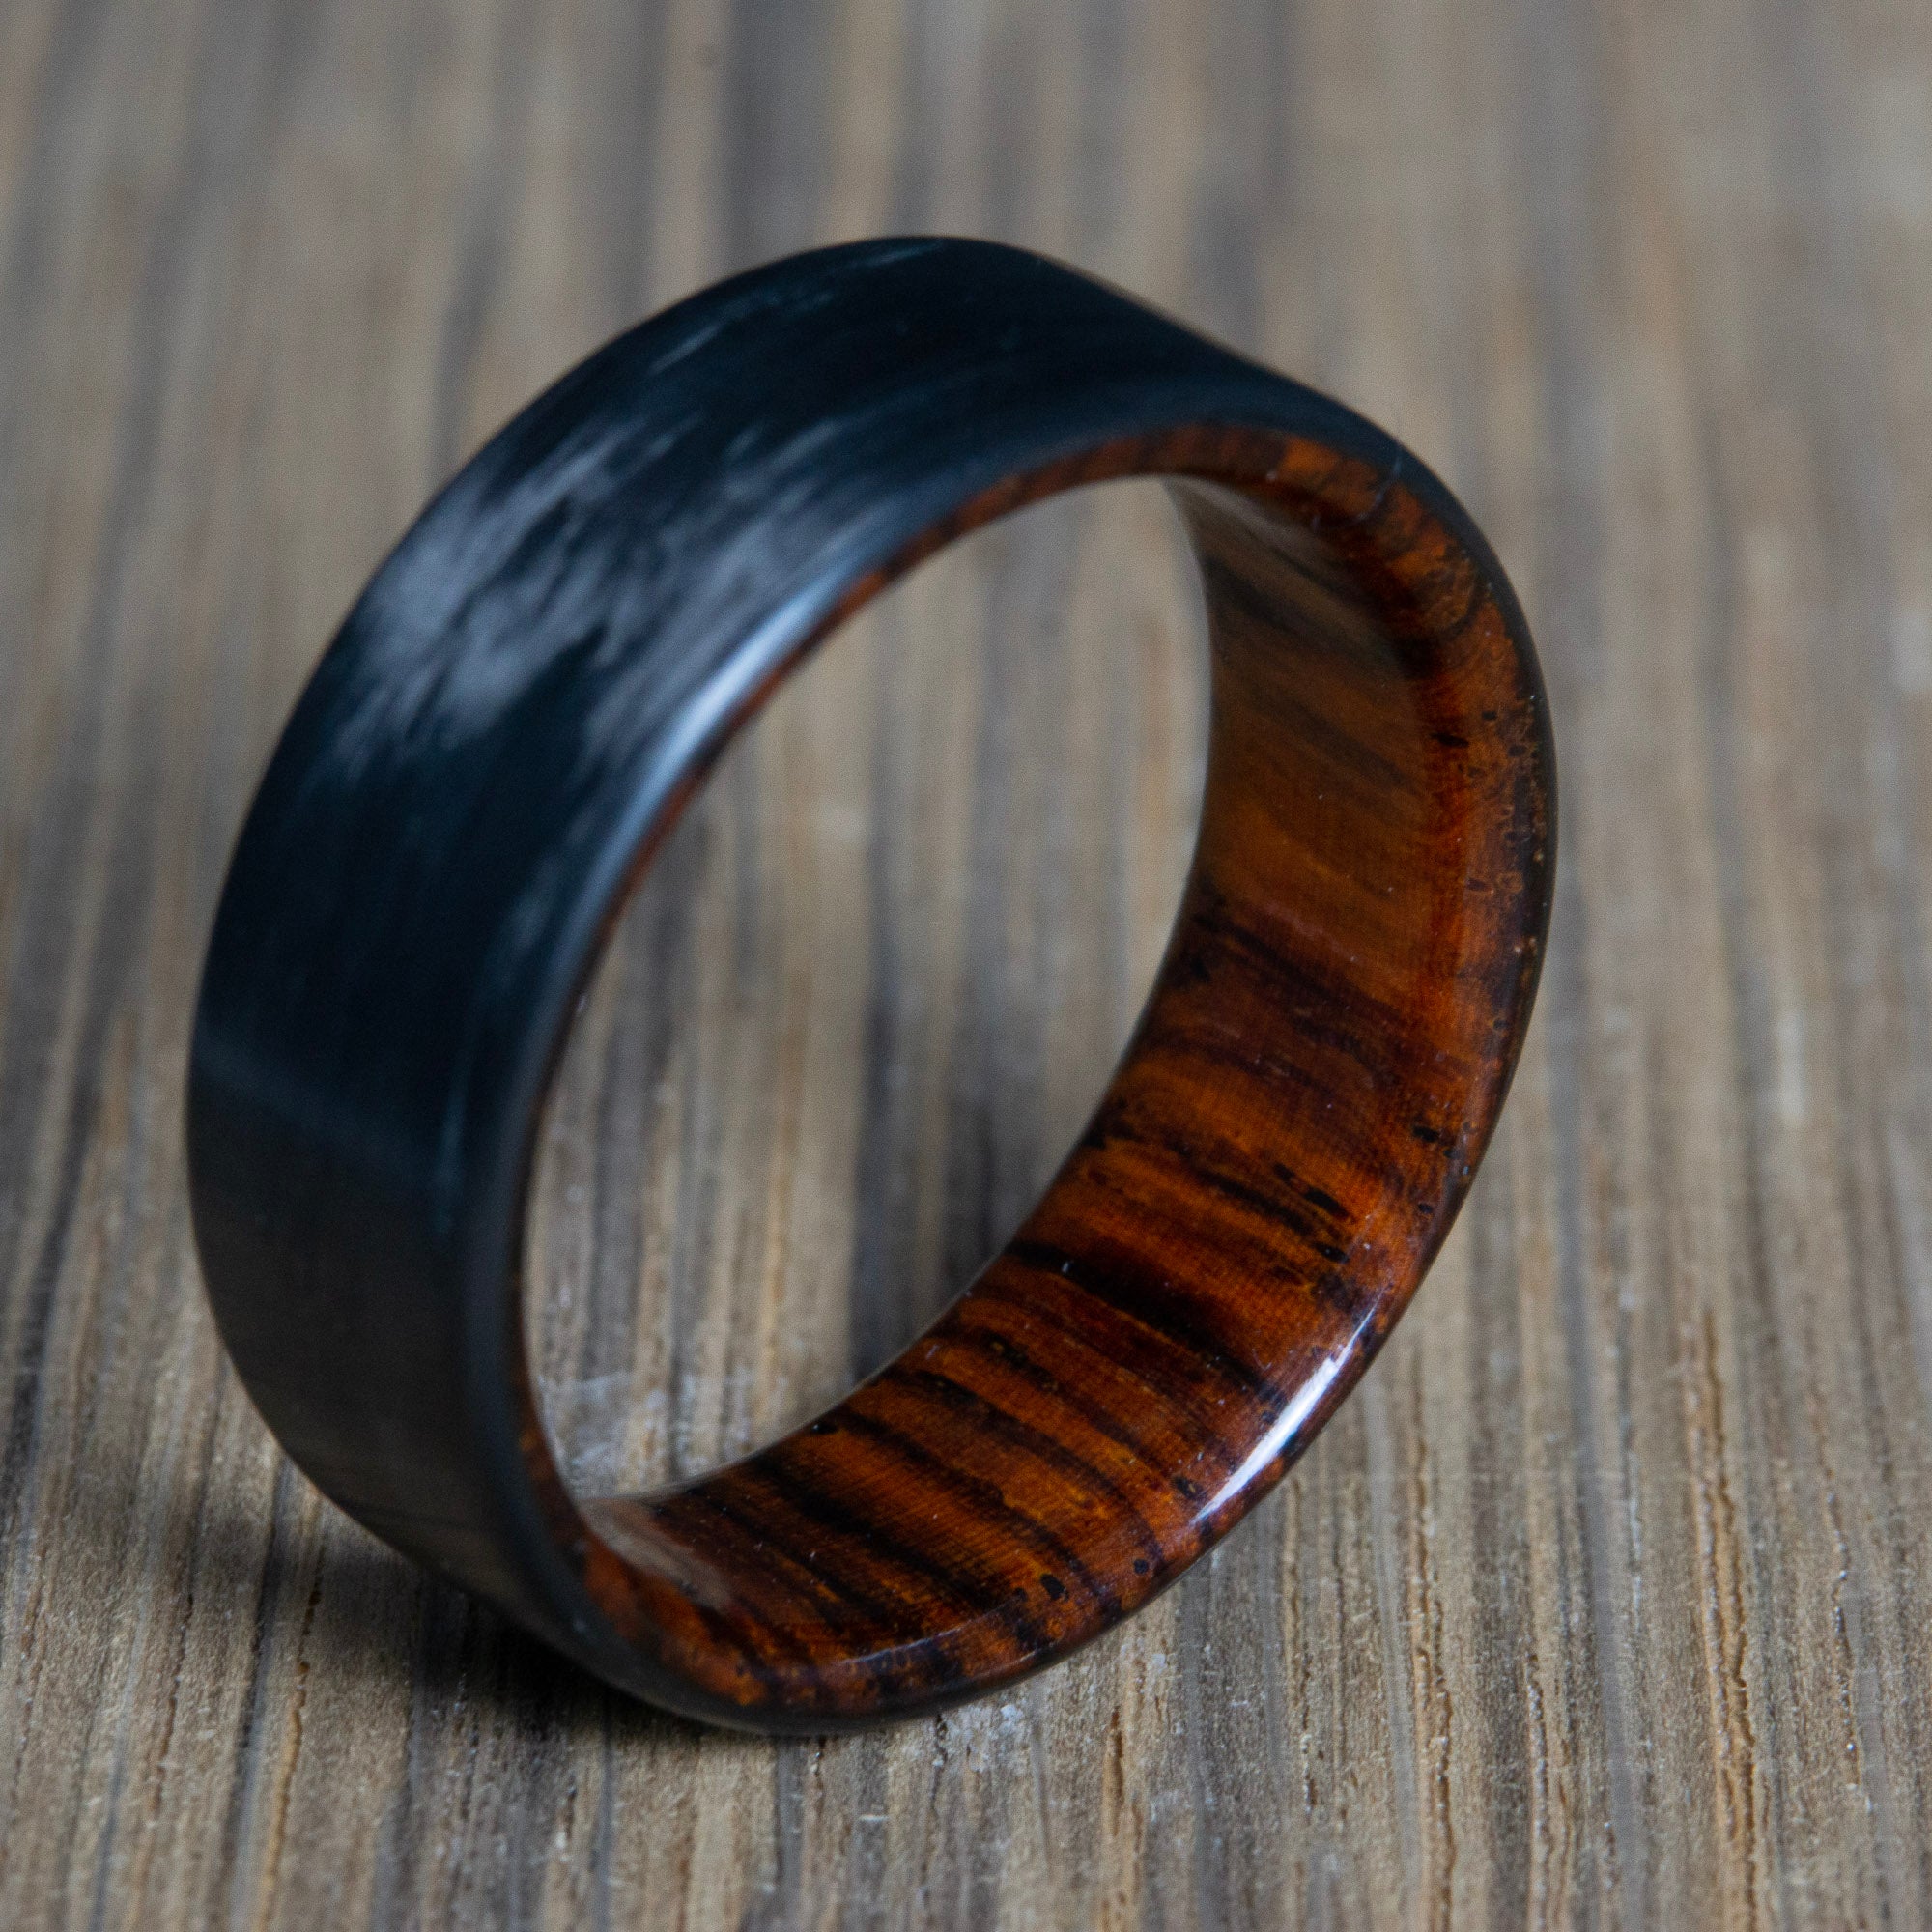 Carbon Fiber Ring with Cocobolo Wood liner